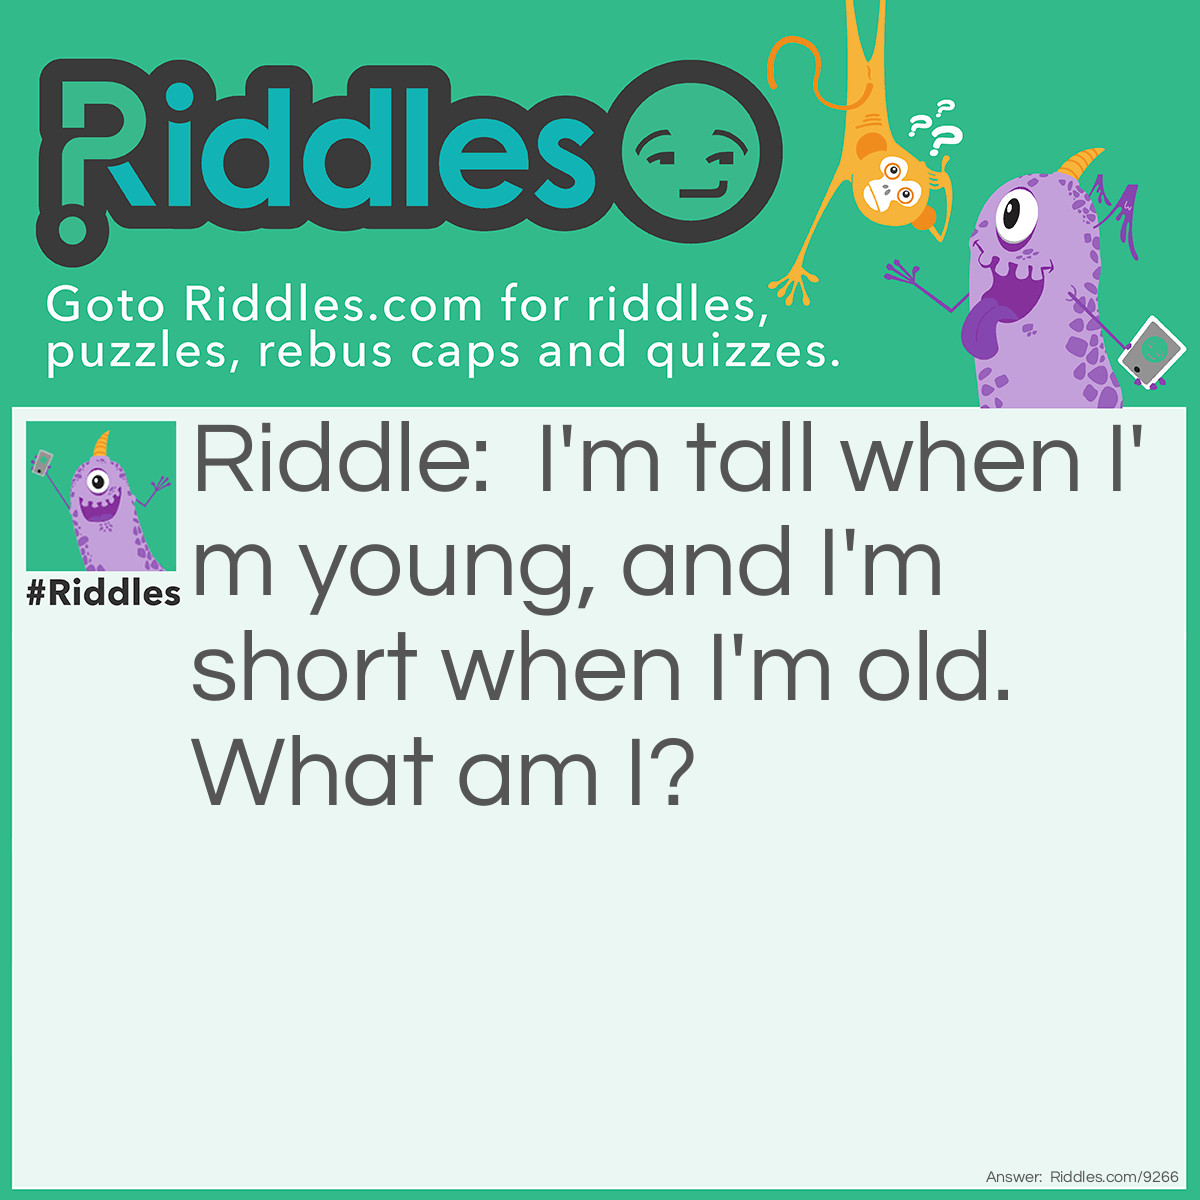 Riddle: I'm tall when I'm young, and I'm short when I'm old. What am I? Answer: Pencil.